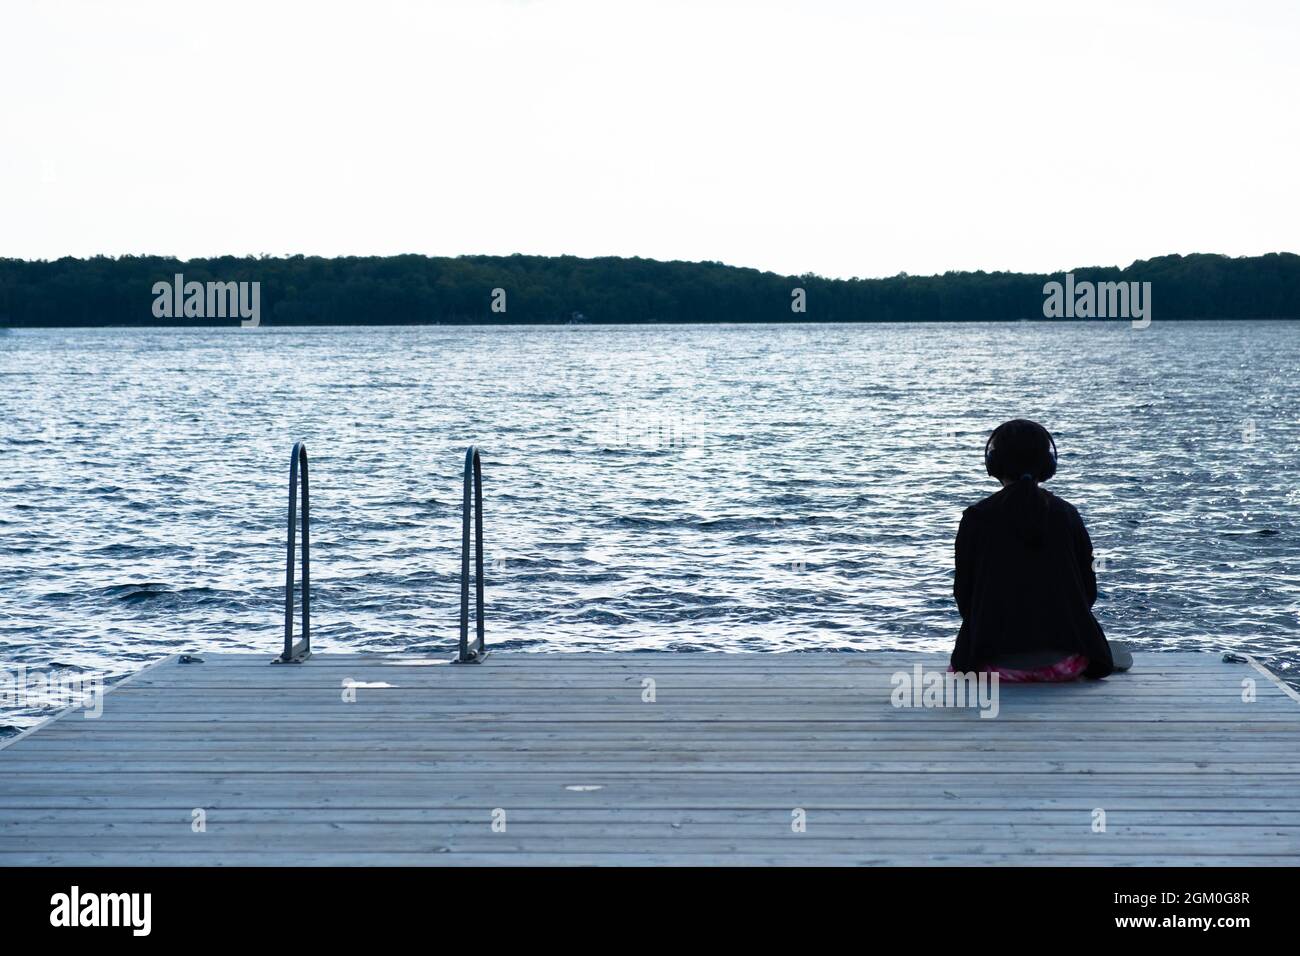 Girl looking out the water with her headphones on. Looking at her reminds me of my teenage years - confused with too much emotions I couldn't handle. Stock Photo